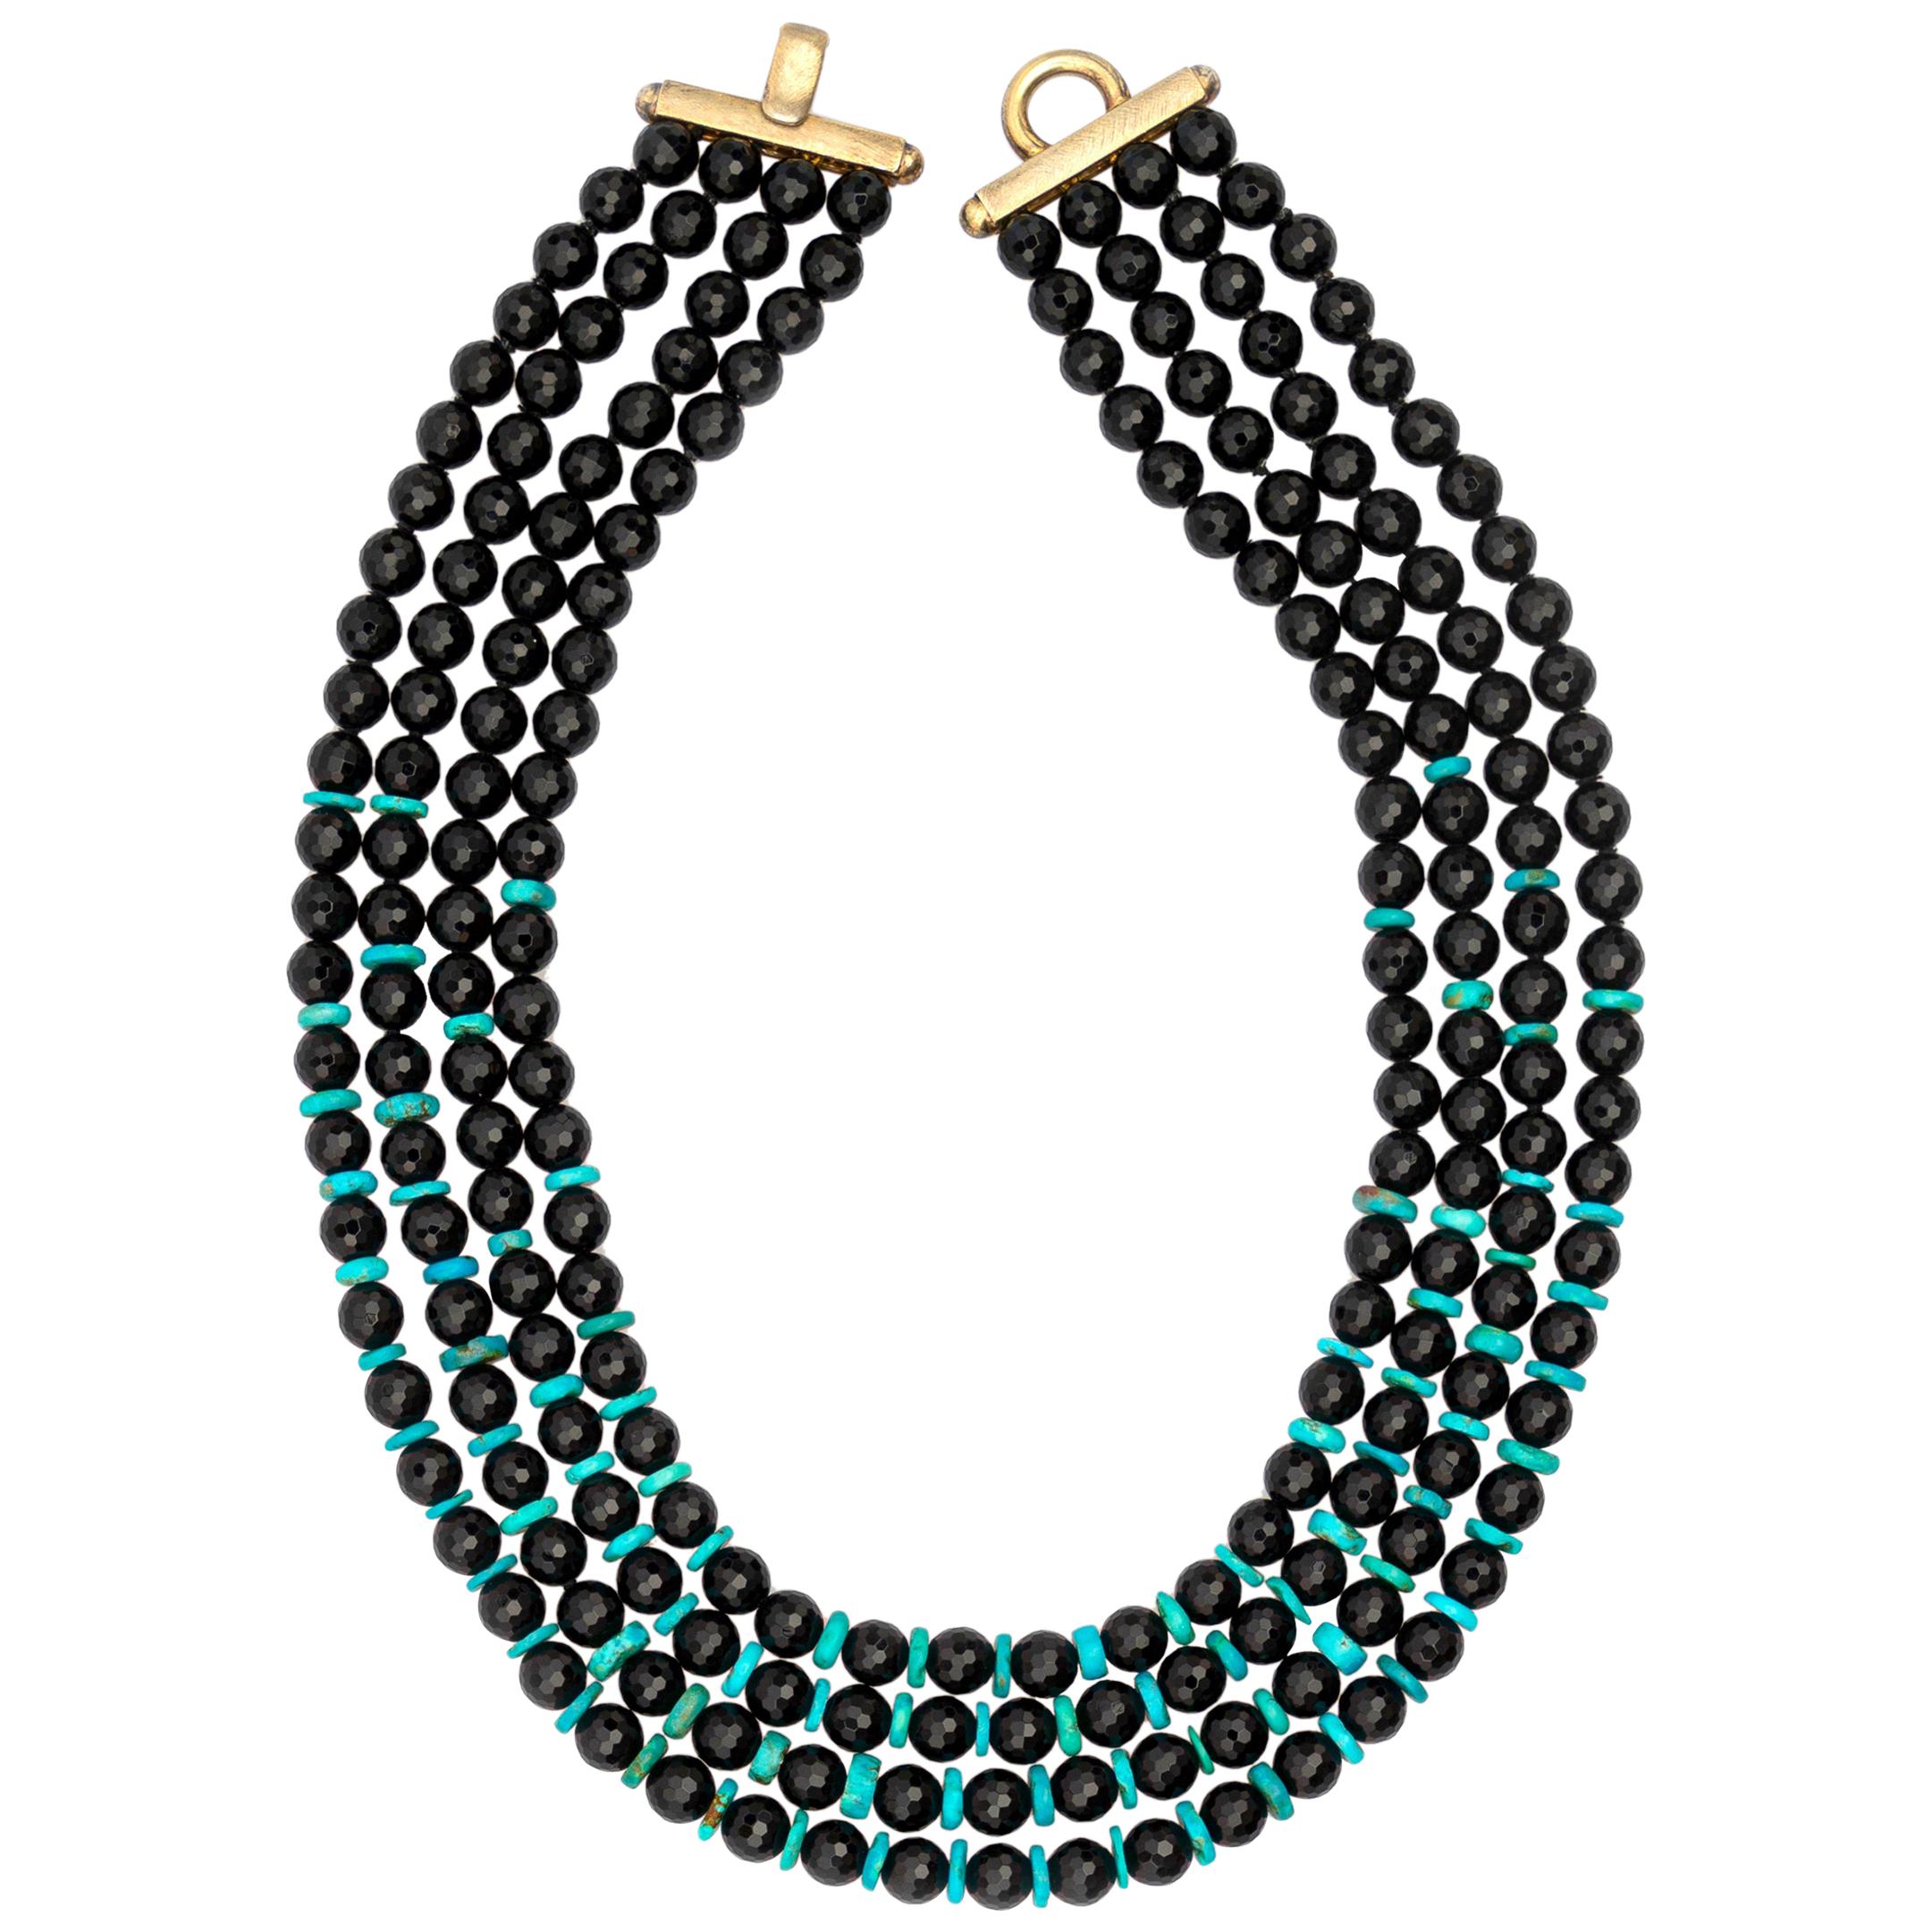 Light Blue Turquoise Black Agate Multi Strand 925 Silver Beads Vintage Necklace For Sale